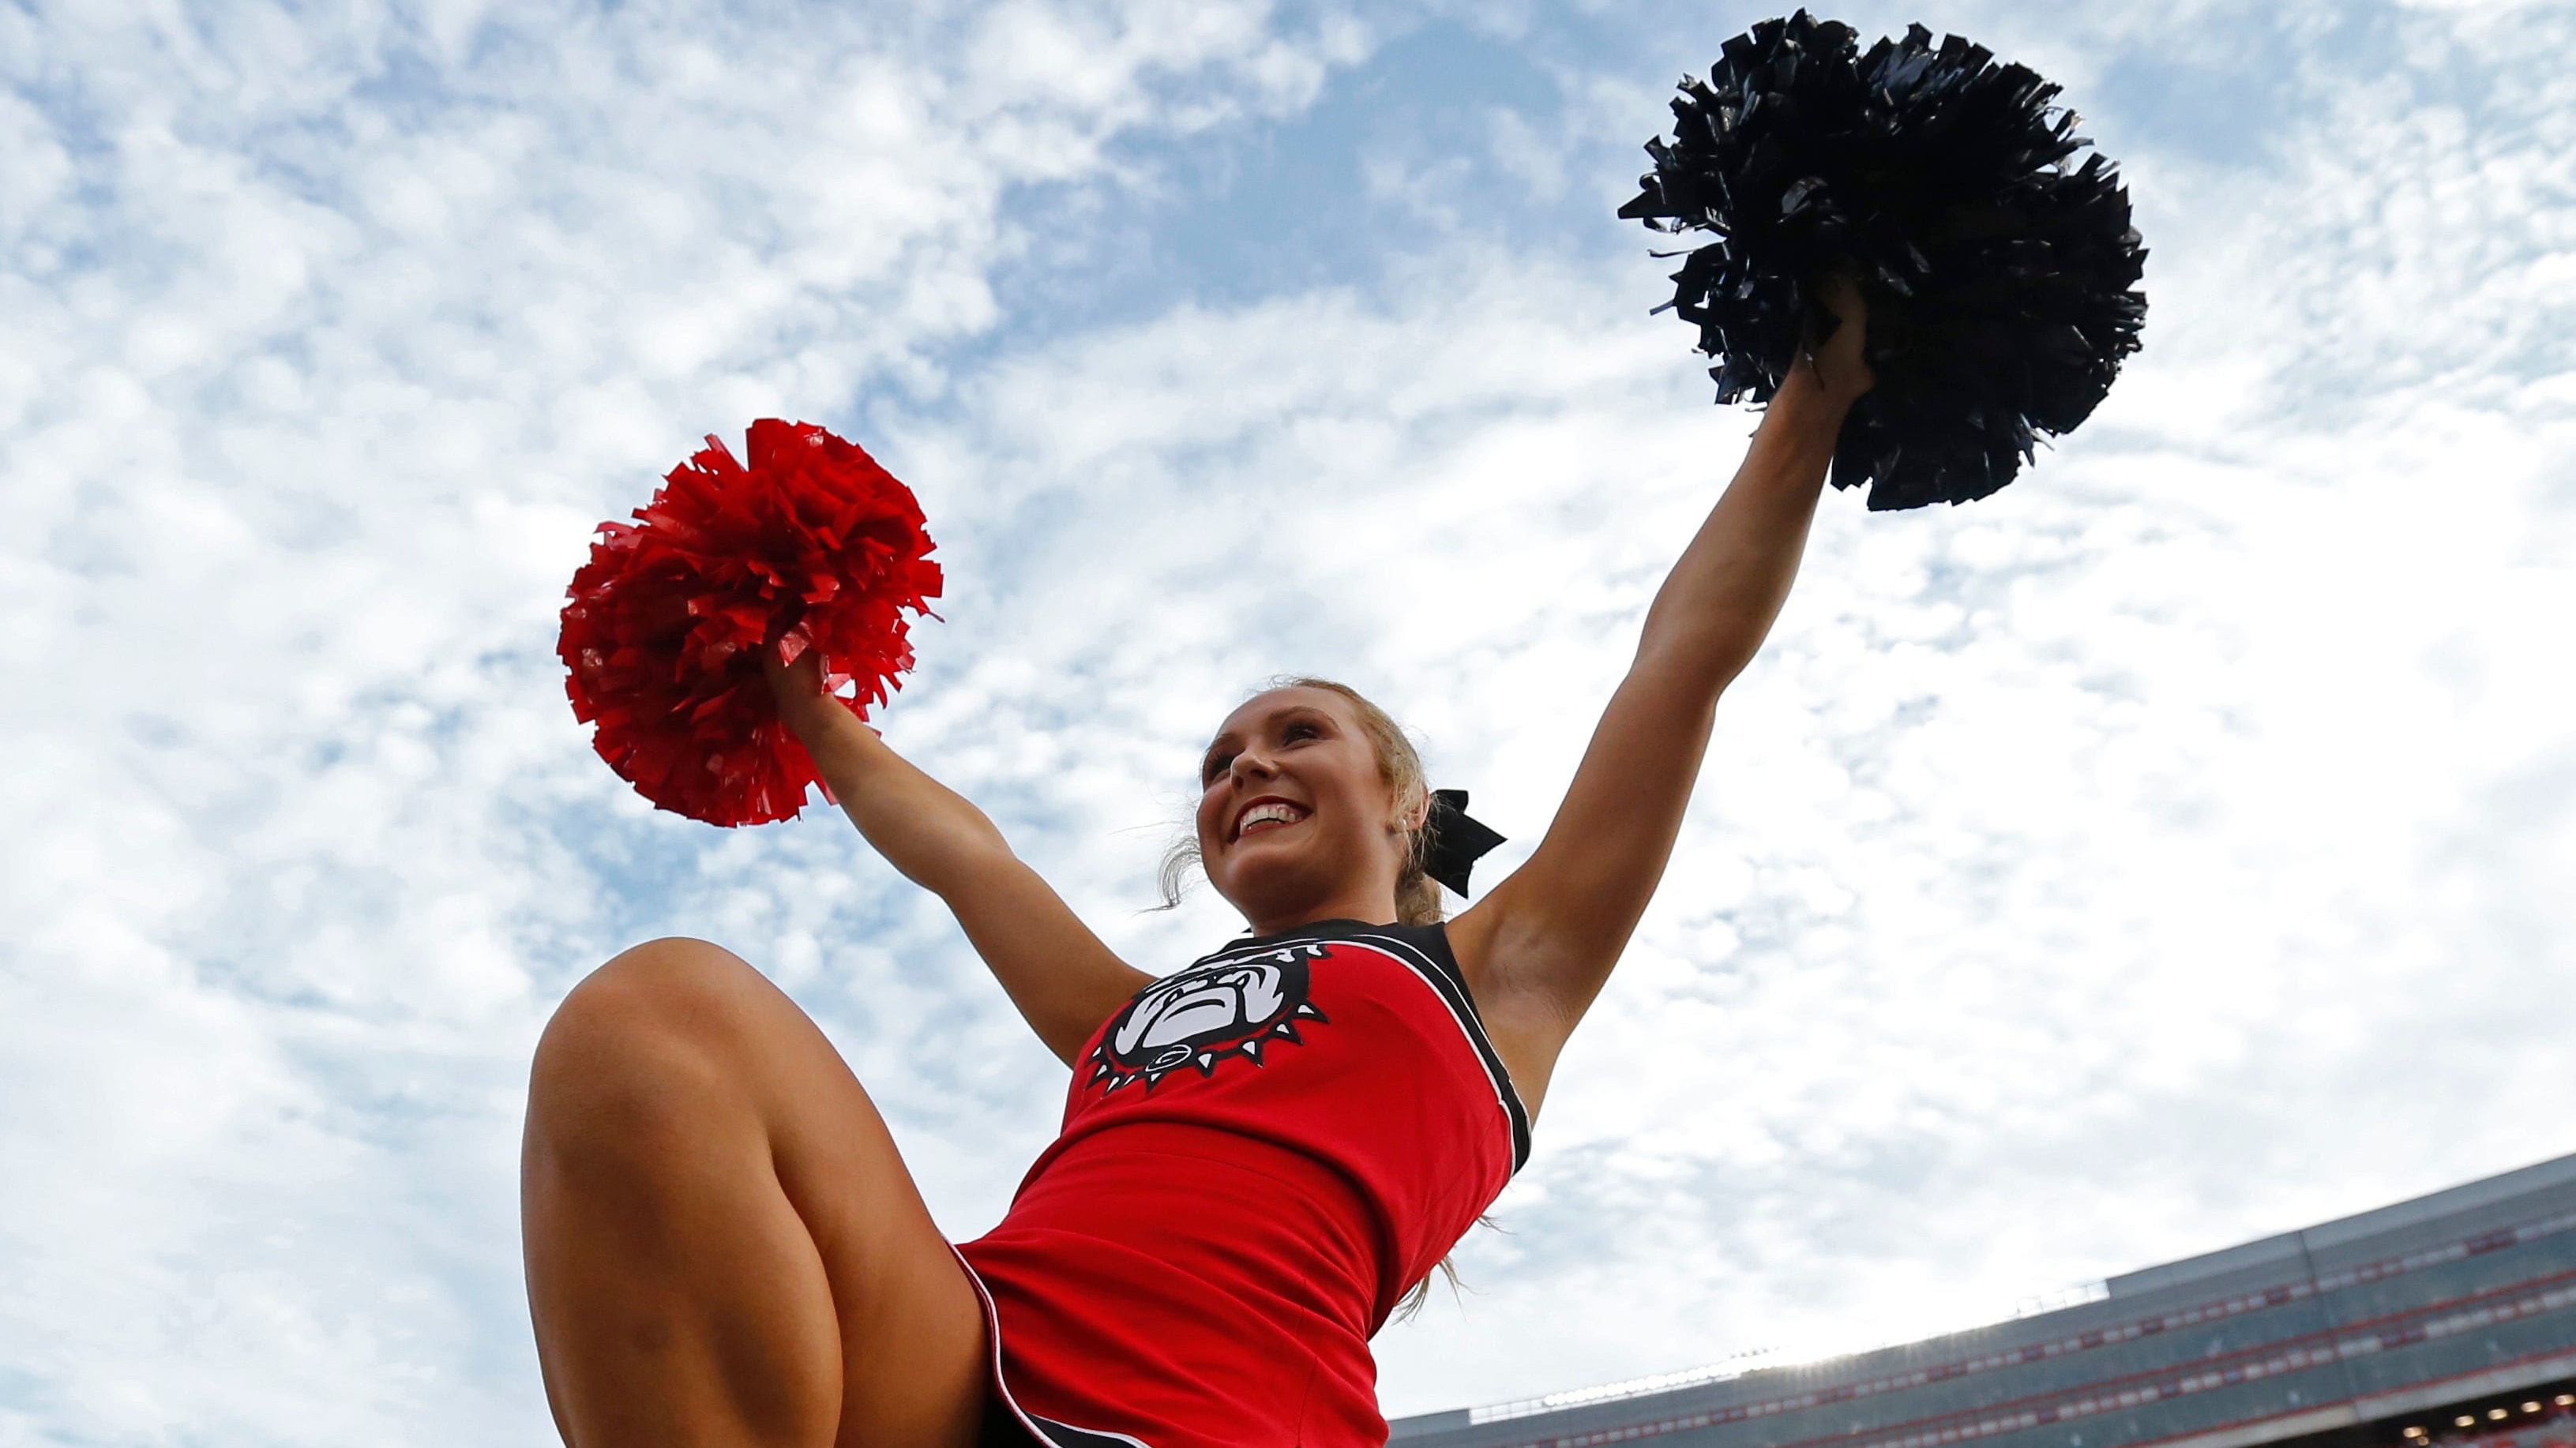 Georgia Bulldogs cheerleader performs during a college football game in the SEC.